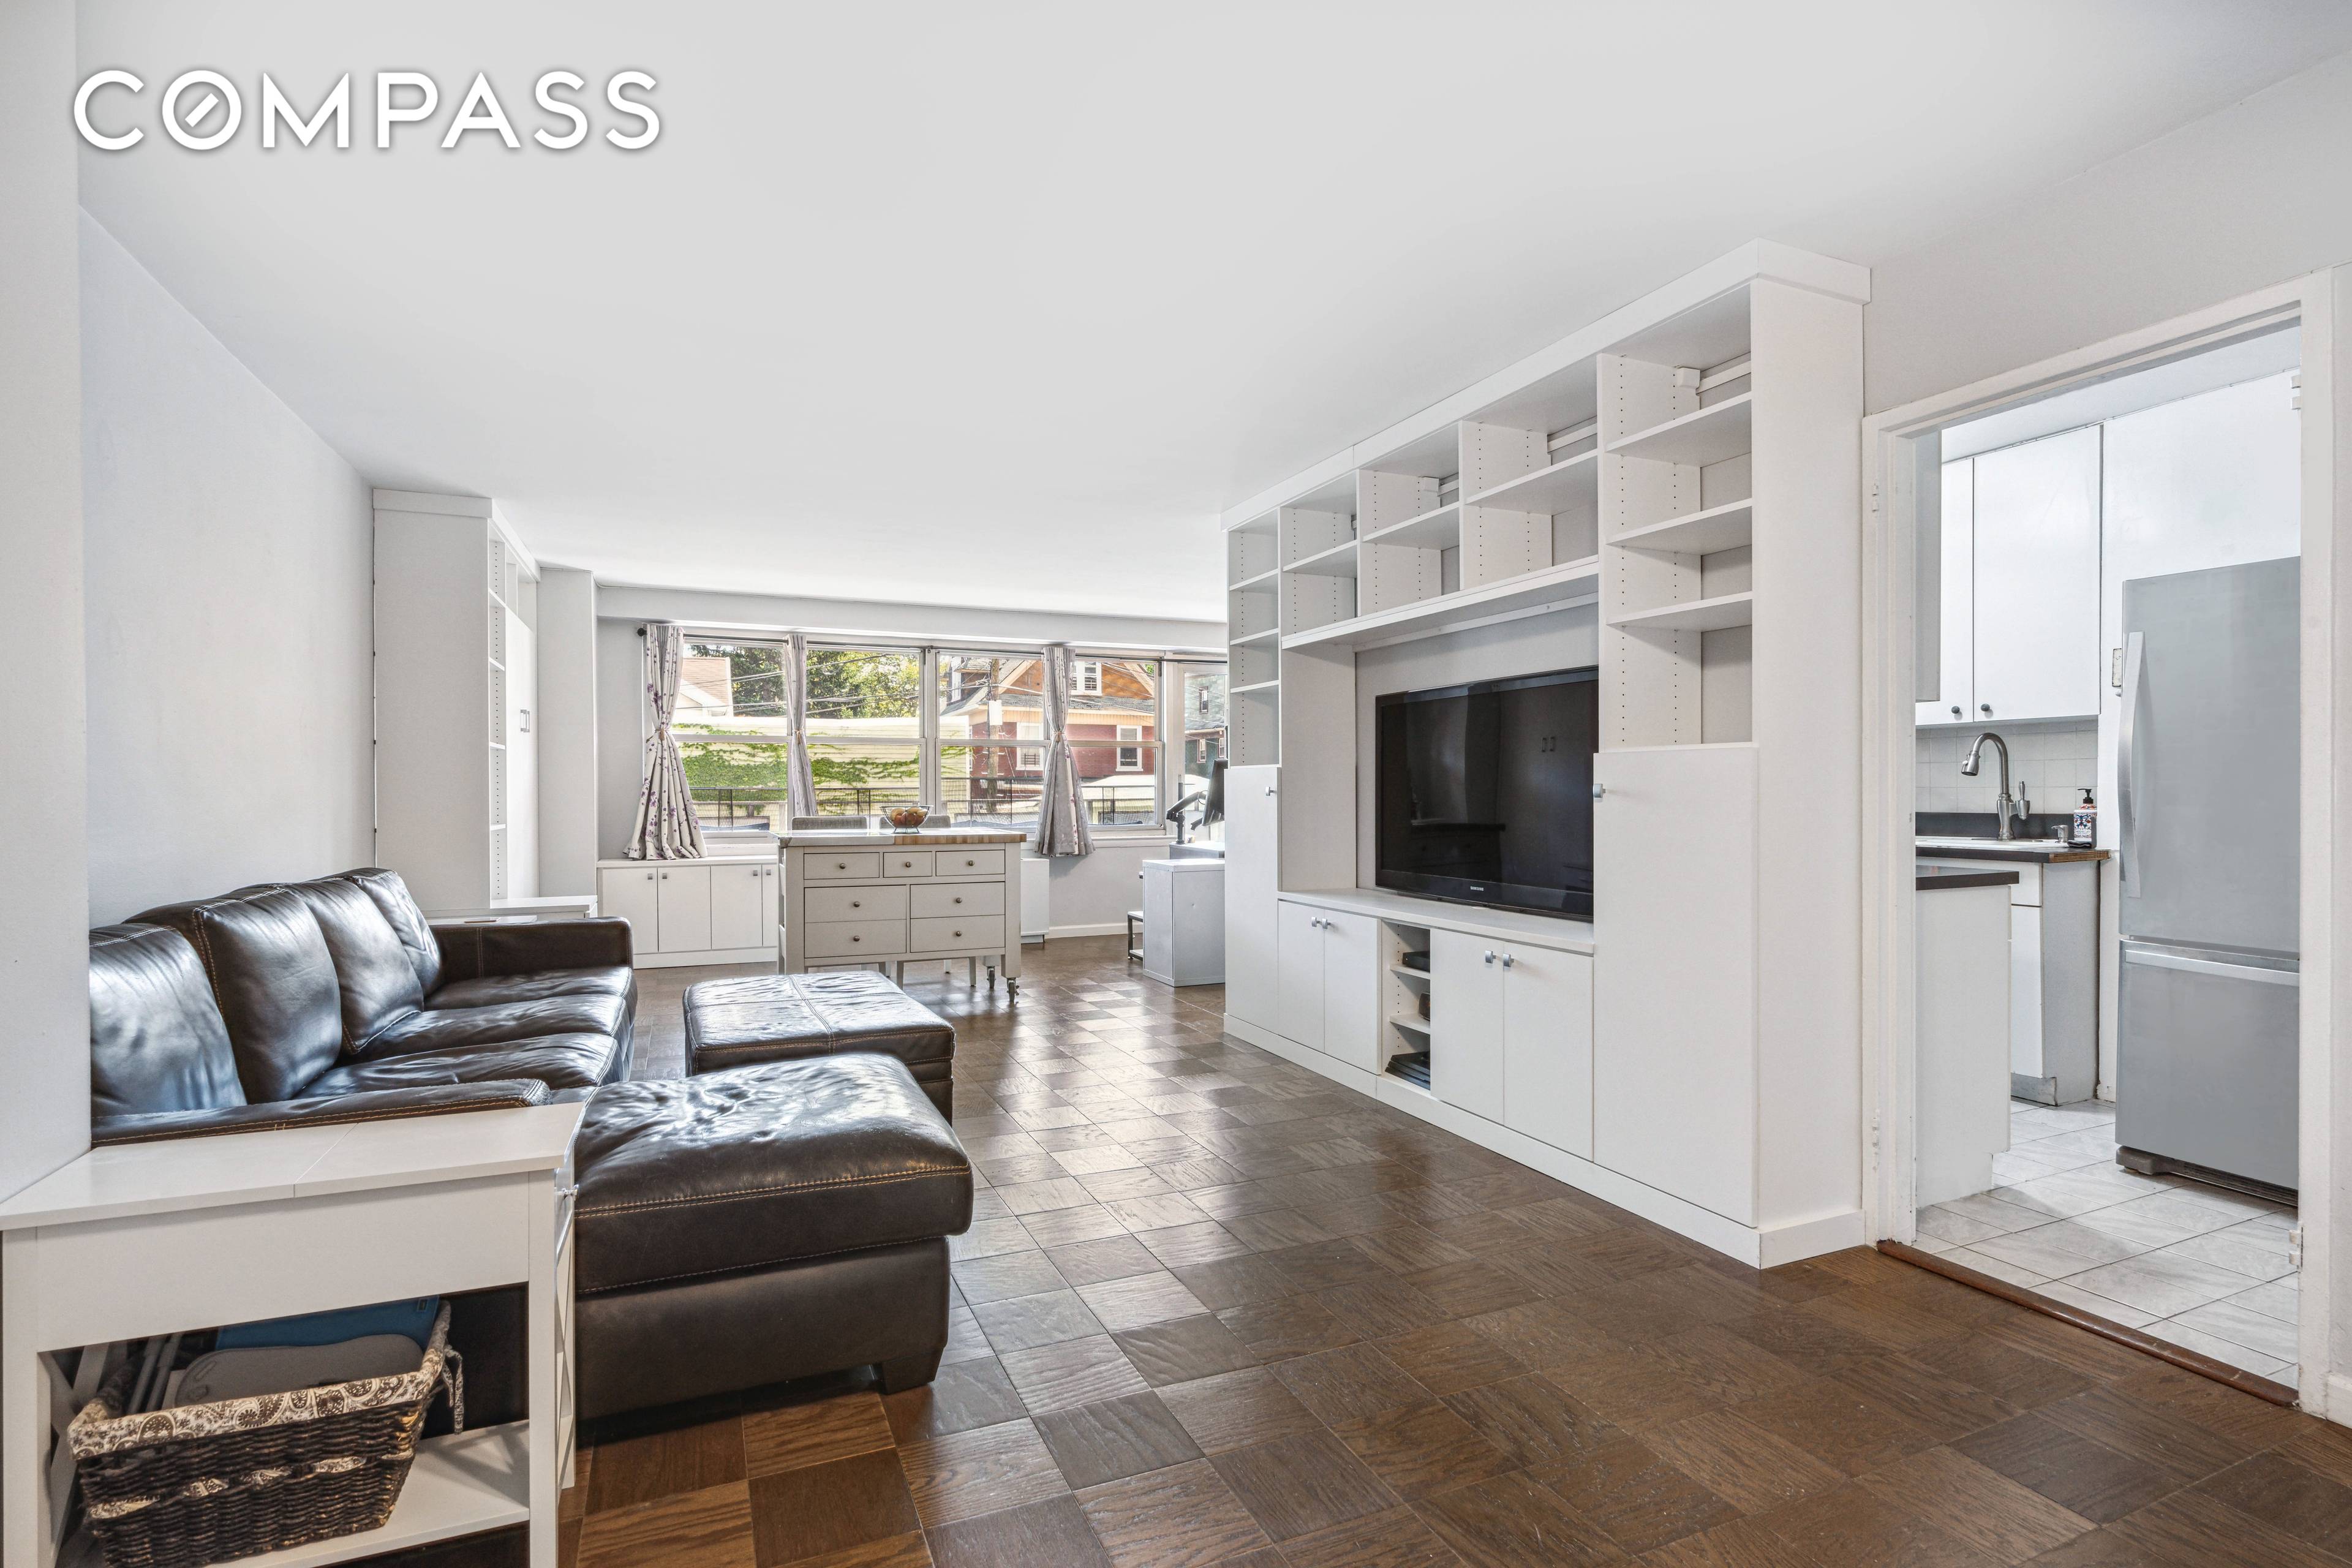 Welcome to 135 Ocean Parkway 2P Generous floor plan offering 900 square feet of inviting and livable space Upon entering you are greeted by a wall of windows at the ...